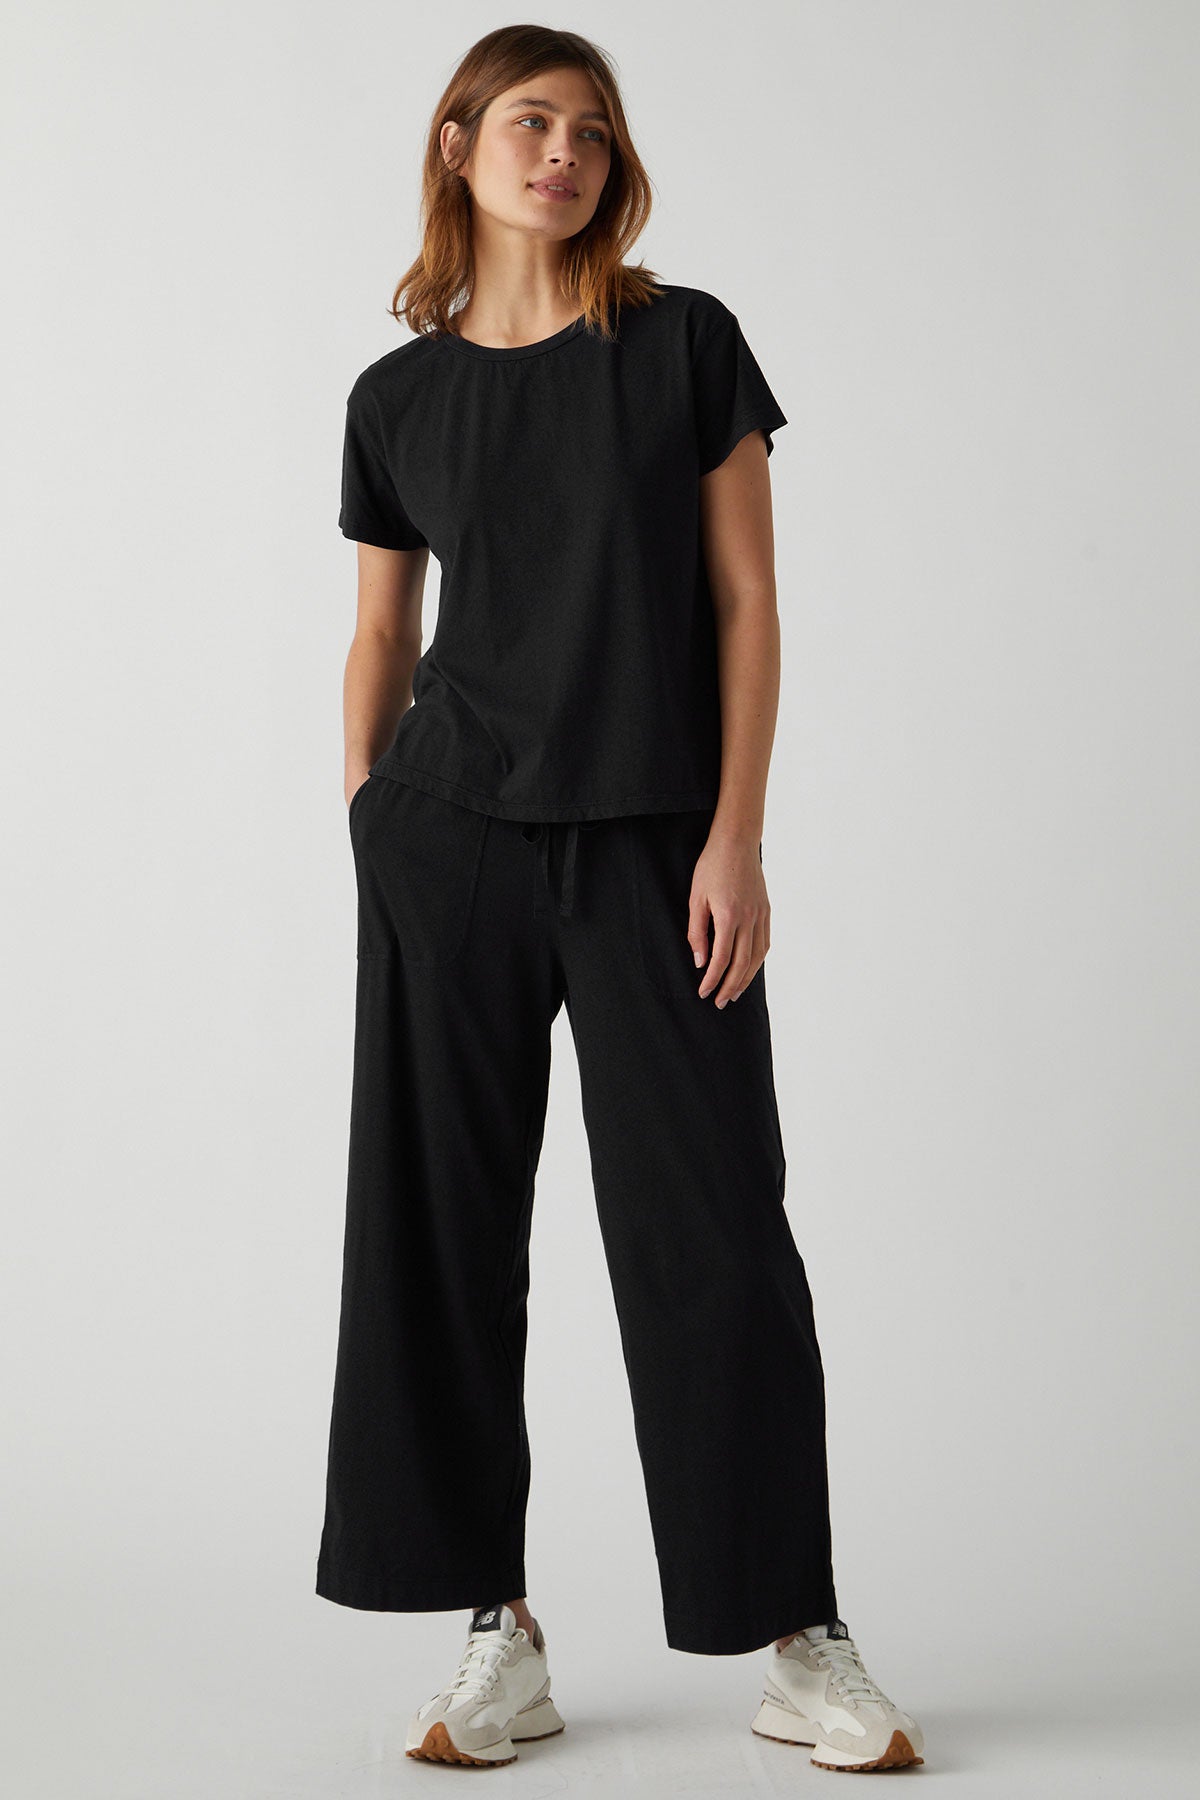 Pismo Pant in black with Topanga Tee full length front-26040599183553